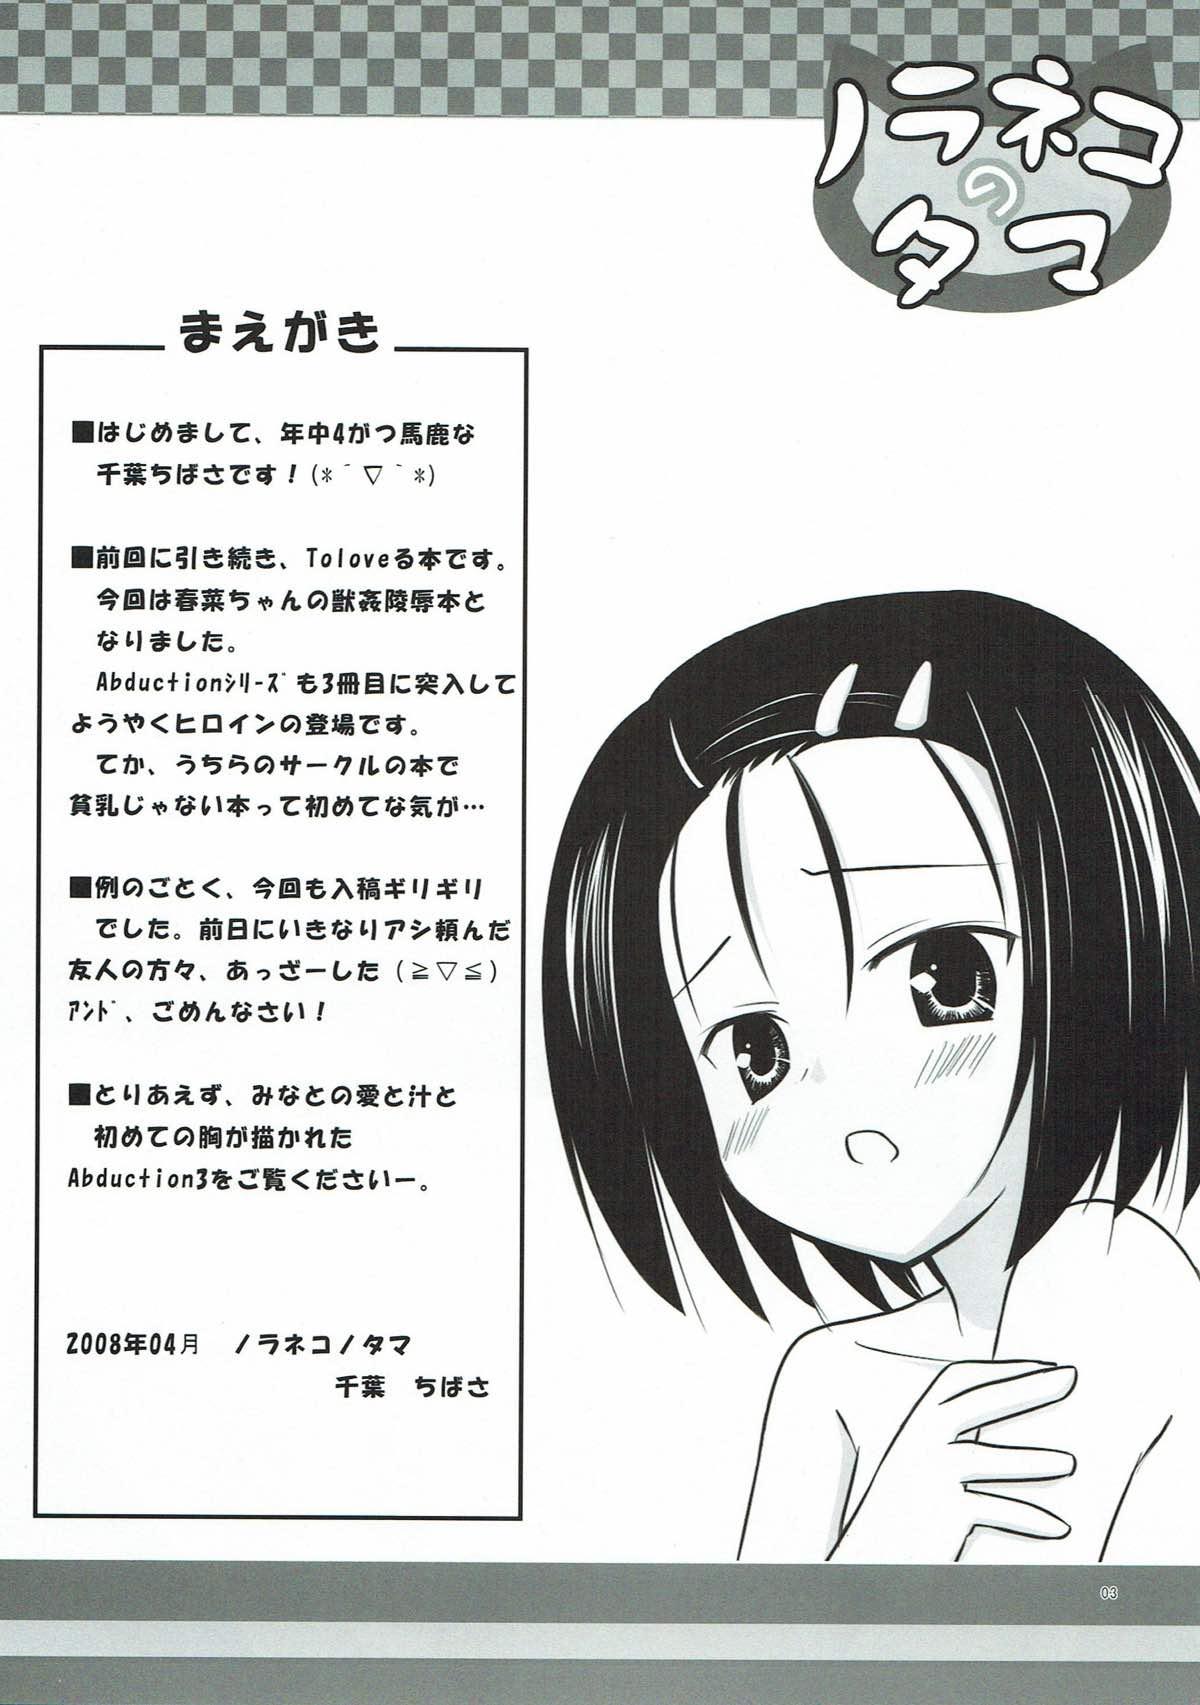 Money Talks Abduction 3 - To love ru Real - Page 2